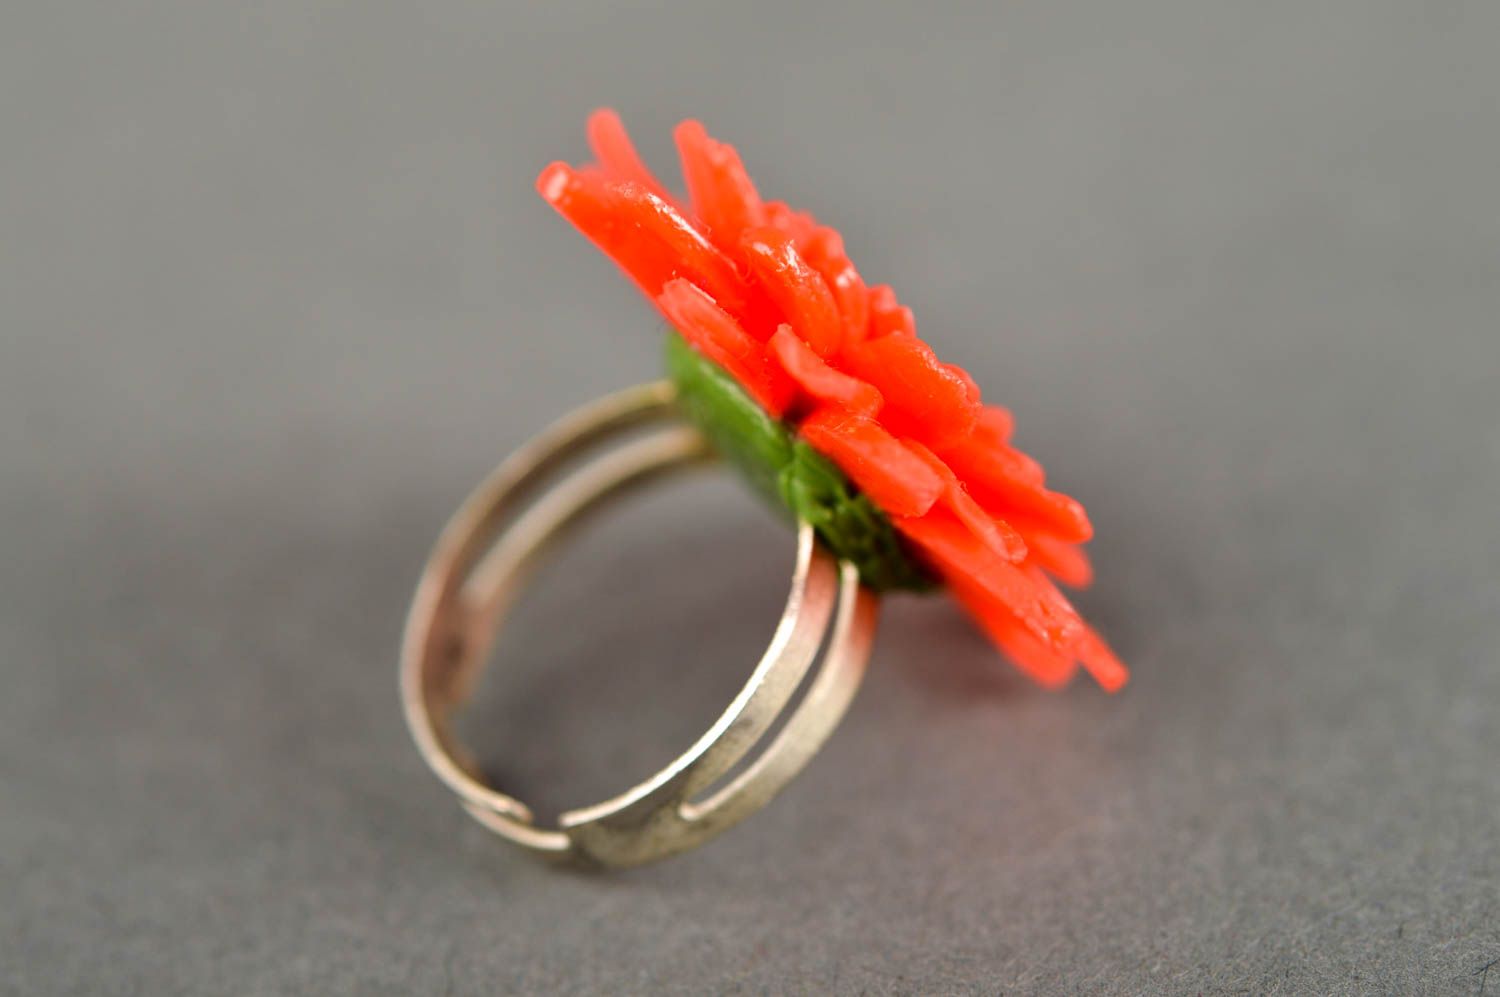 Stylish handmade flower ring unusual plastic ring polymer clay ideas small gifts photo 2